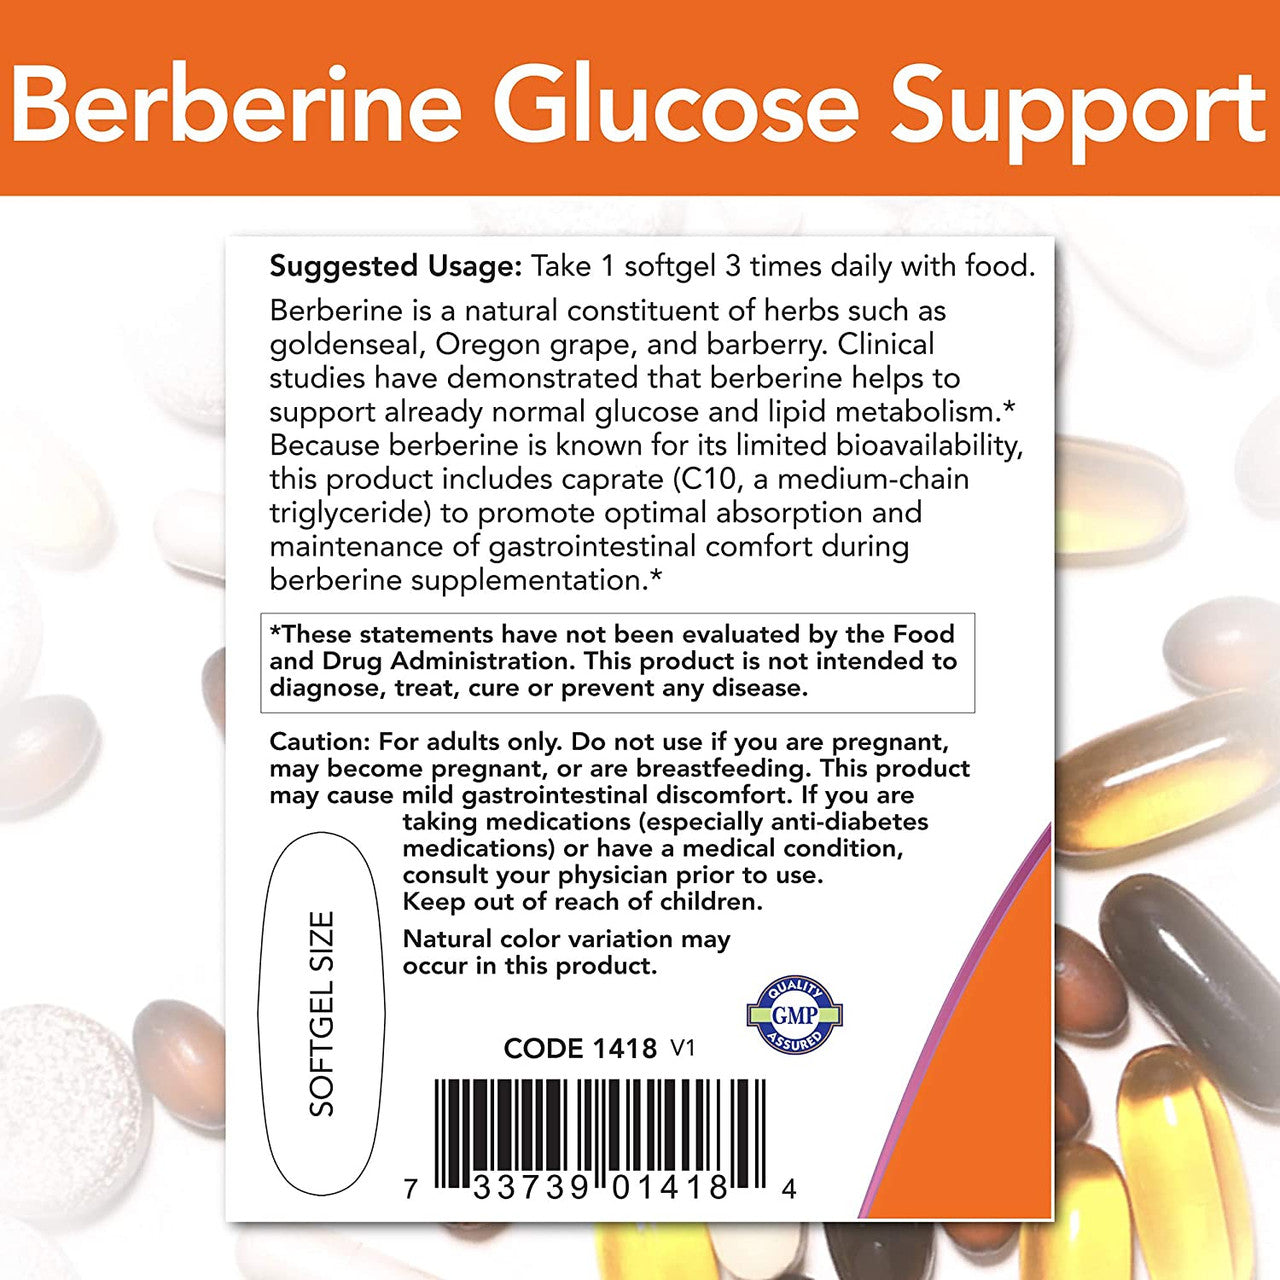 Now Berberine Glucose Support directions